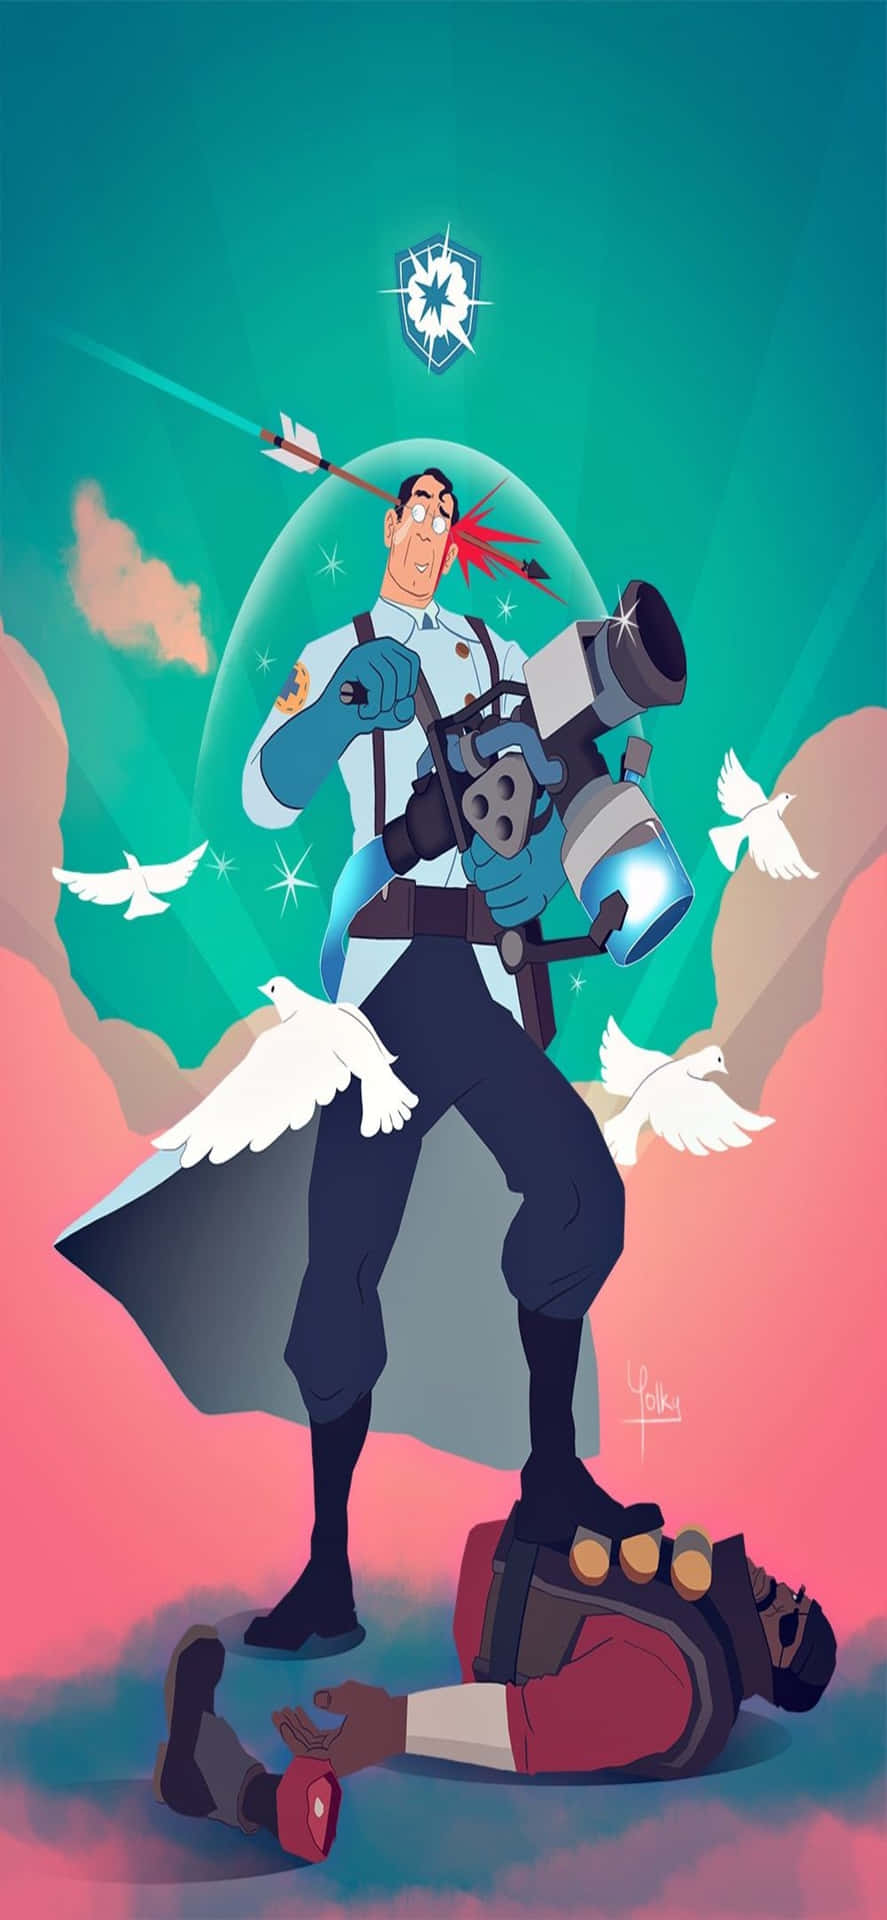 Iphone Xs Tf2 Background Fanart Of The Medic Standing On Top Of Demoman